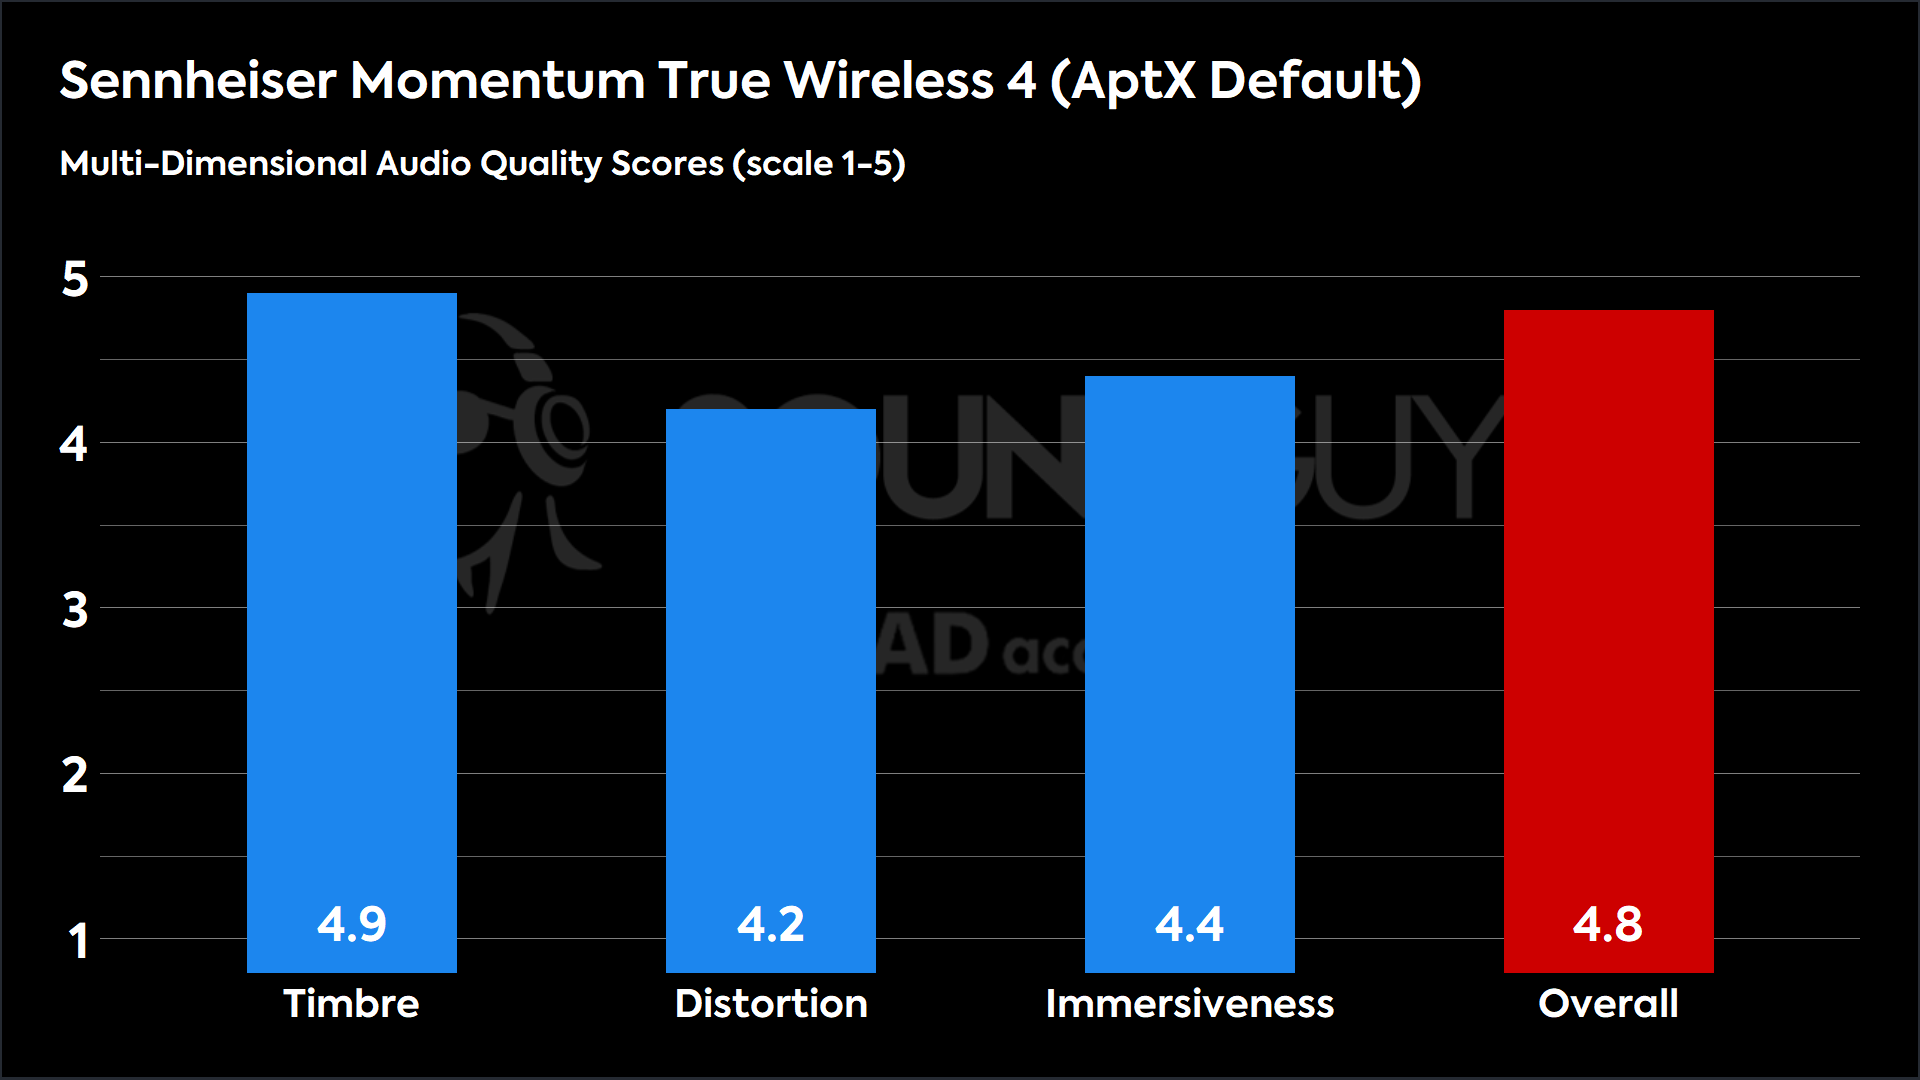 This chart shows the MDAQS results for the Sennheiser Momentum True Wireless 4 in AptX Default mode. The Timbre score is 4.9, The Distortion score is 4.2, the Immersiveness score is 4.4, and the Overall Score is 4.8).